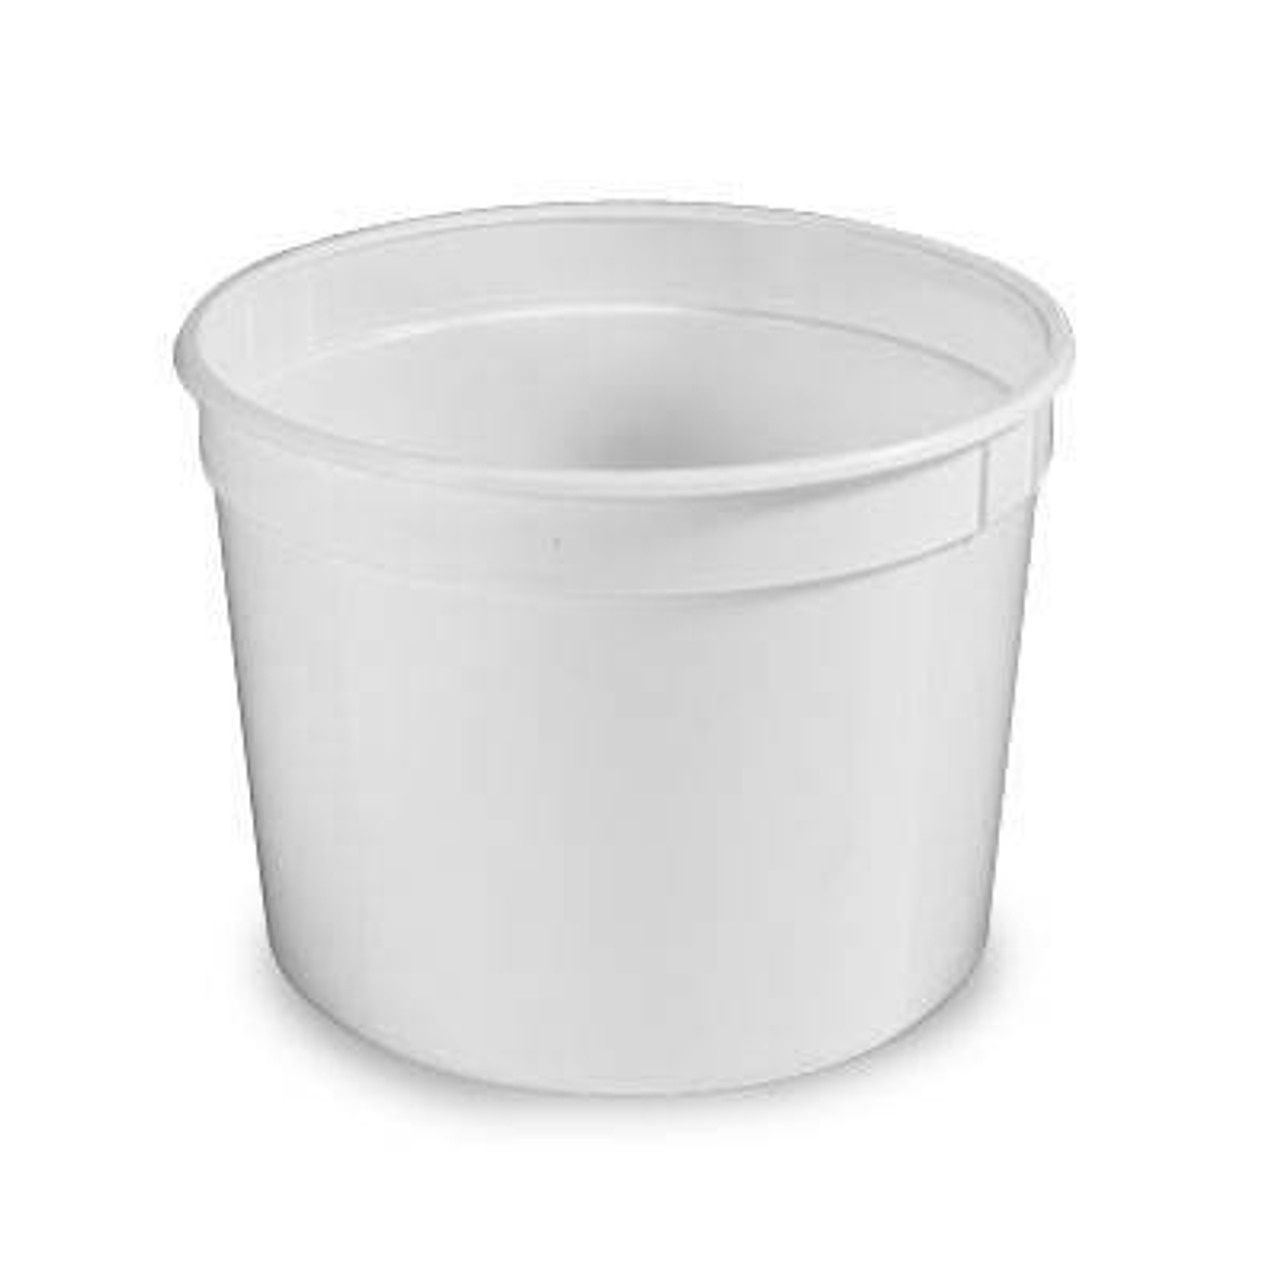 https://cdn11.bigcommerce.com/s-w7jcic88/images/stencil/1280x1280/products/879/1932/t51350cp-50%20oz%20white%20round%20container%20-%20berry%20photo__75765.1695481775.jpg?c=2